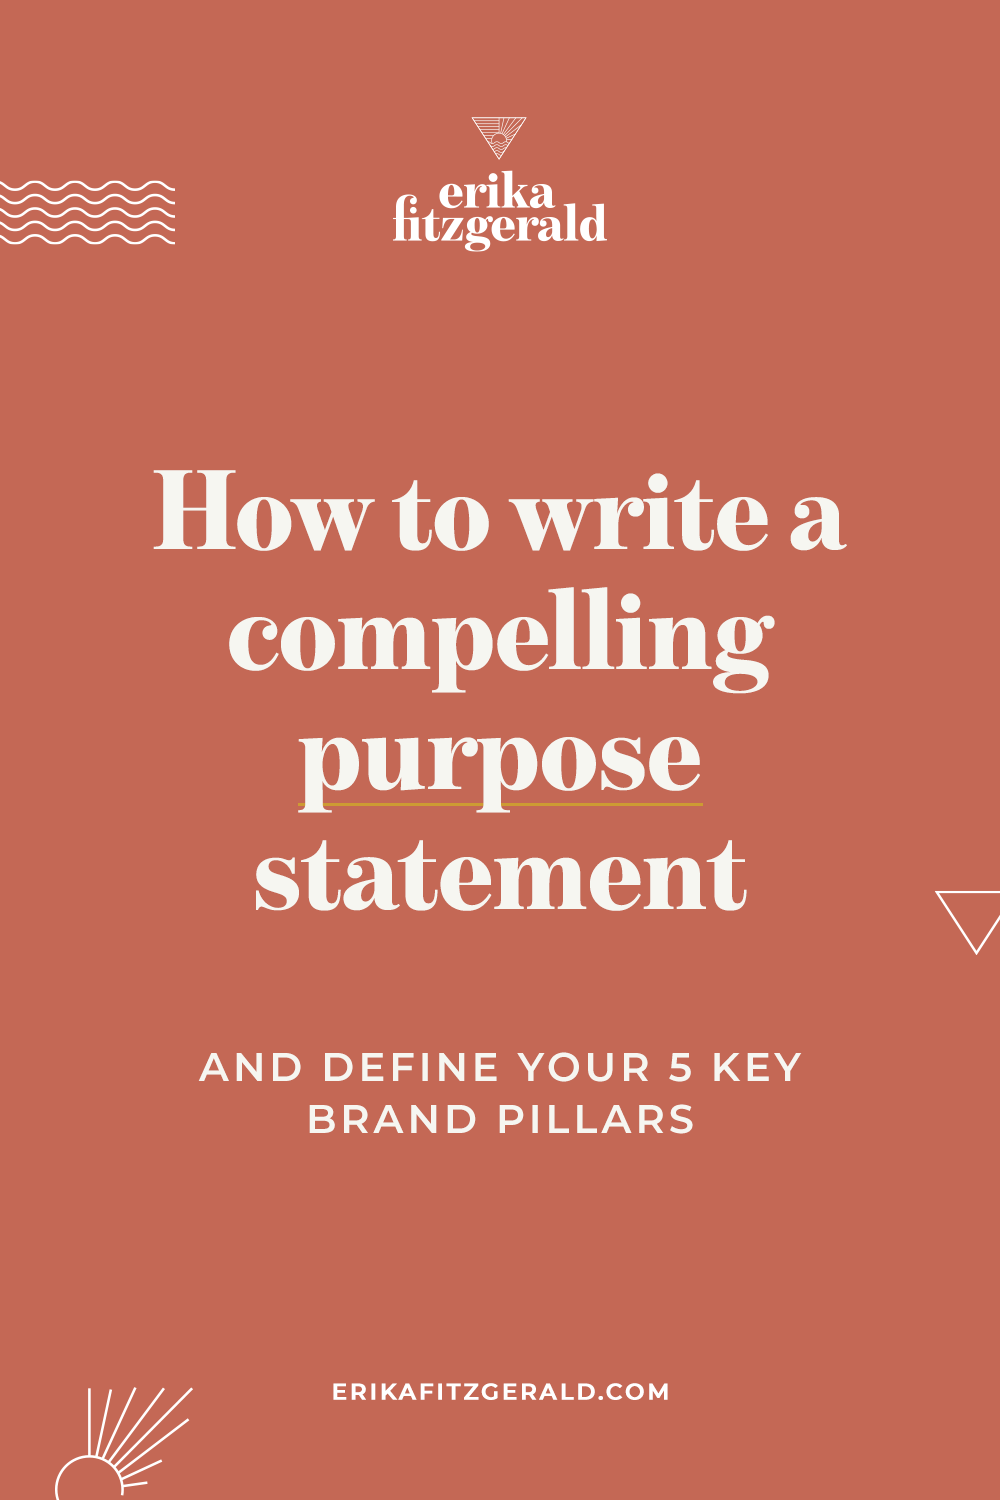 How to write a compelling purpose statement